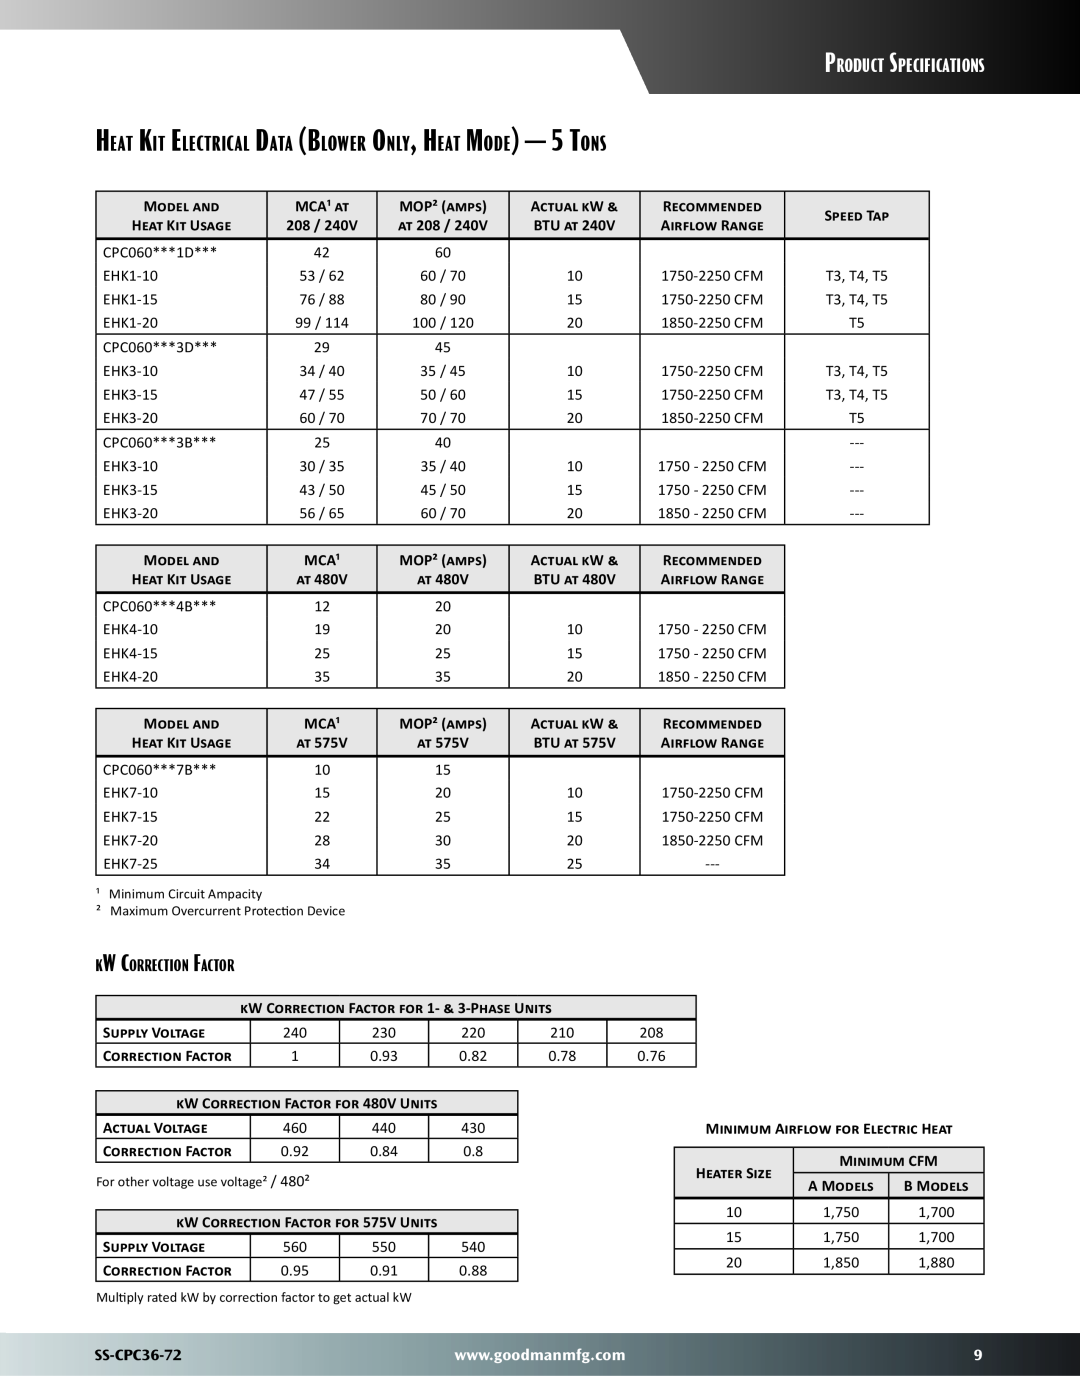 Goodman Mfg SS-CPC36-72 dimensions Product Specifications, kW Correction Factor 